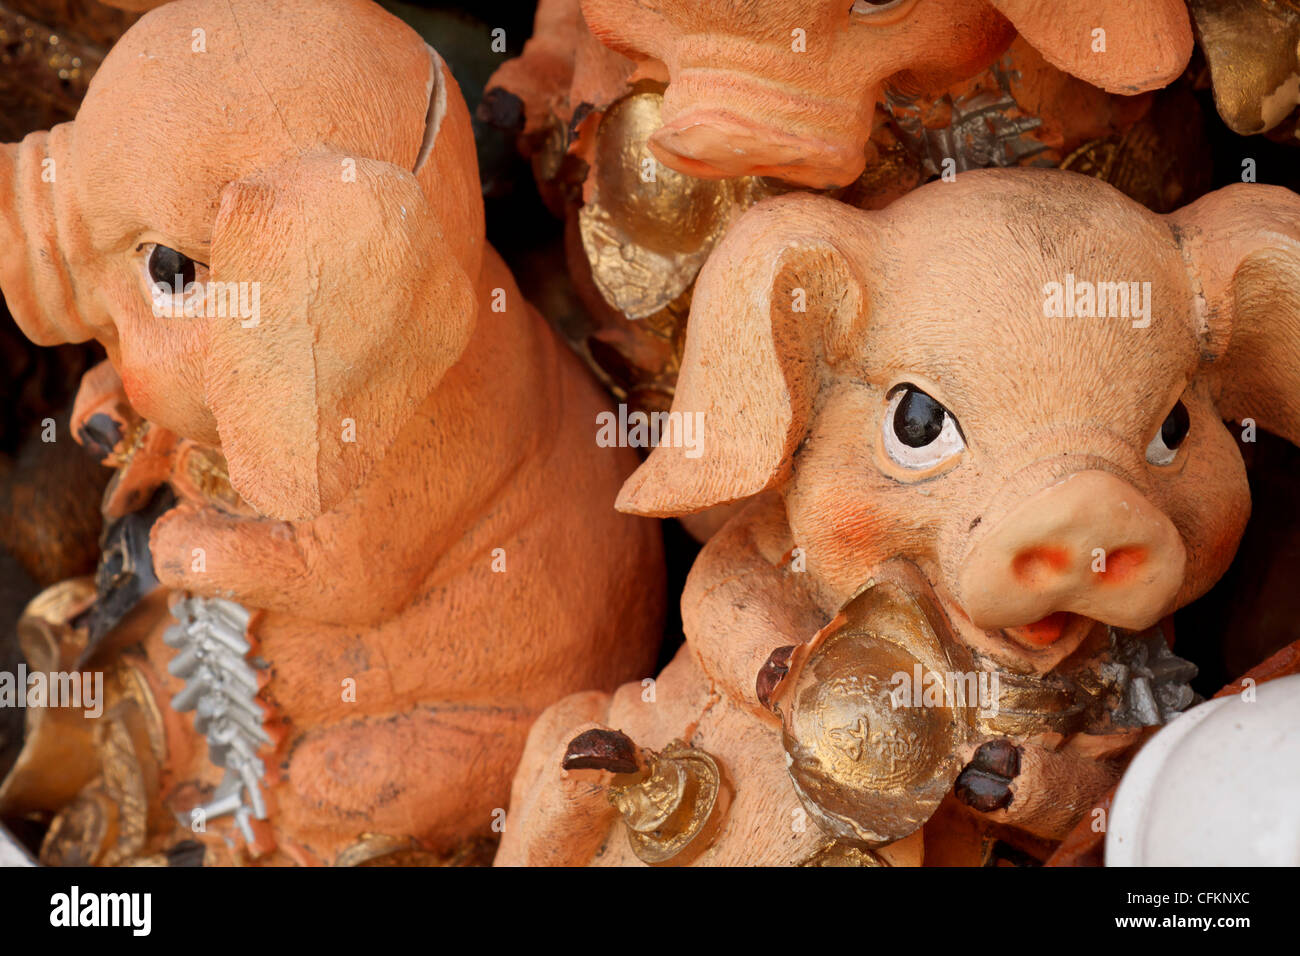 Cute little piggy banks on display at Mexican market. Stock Photo